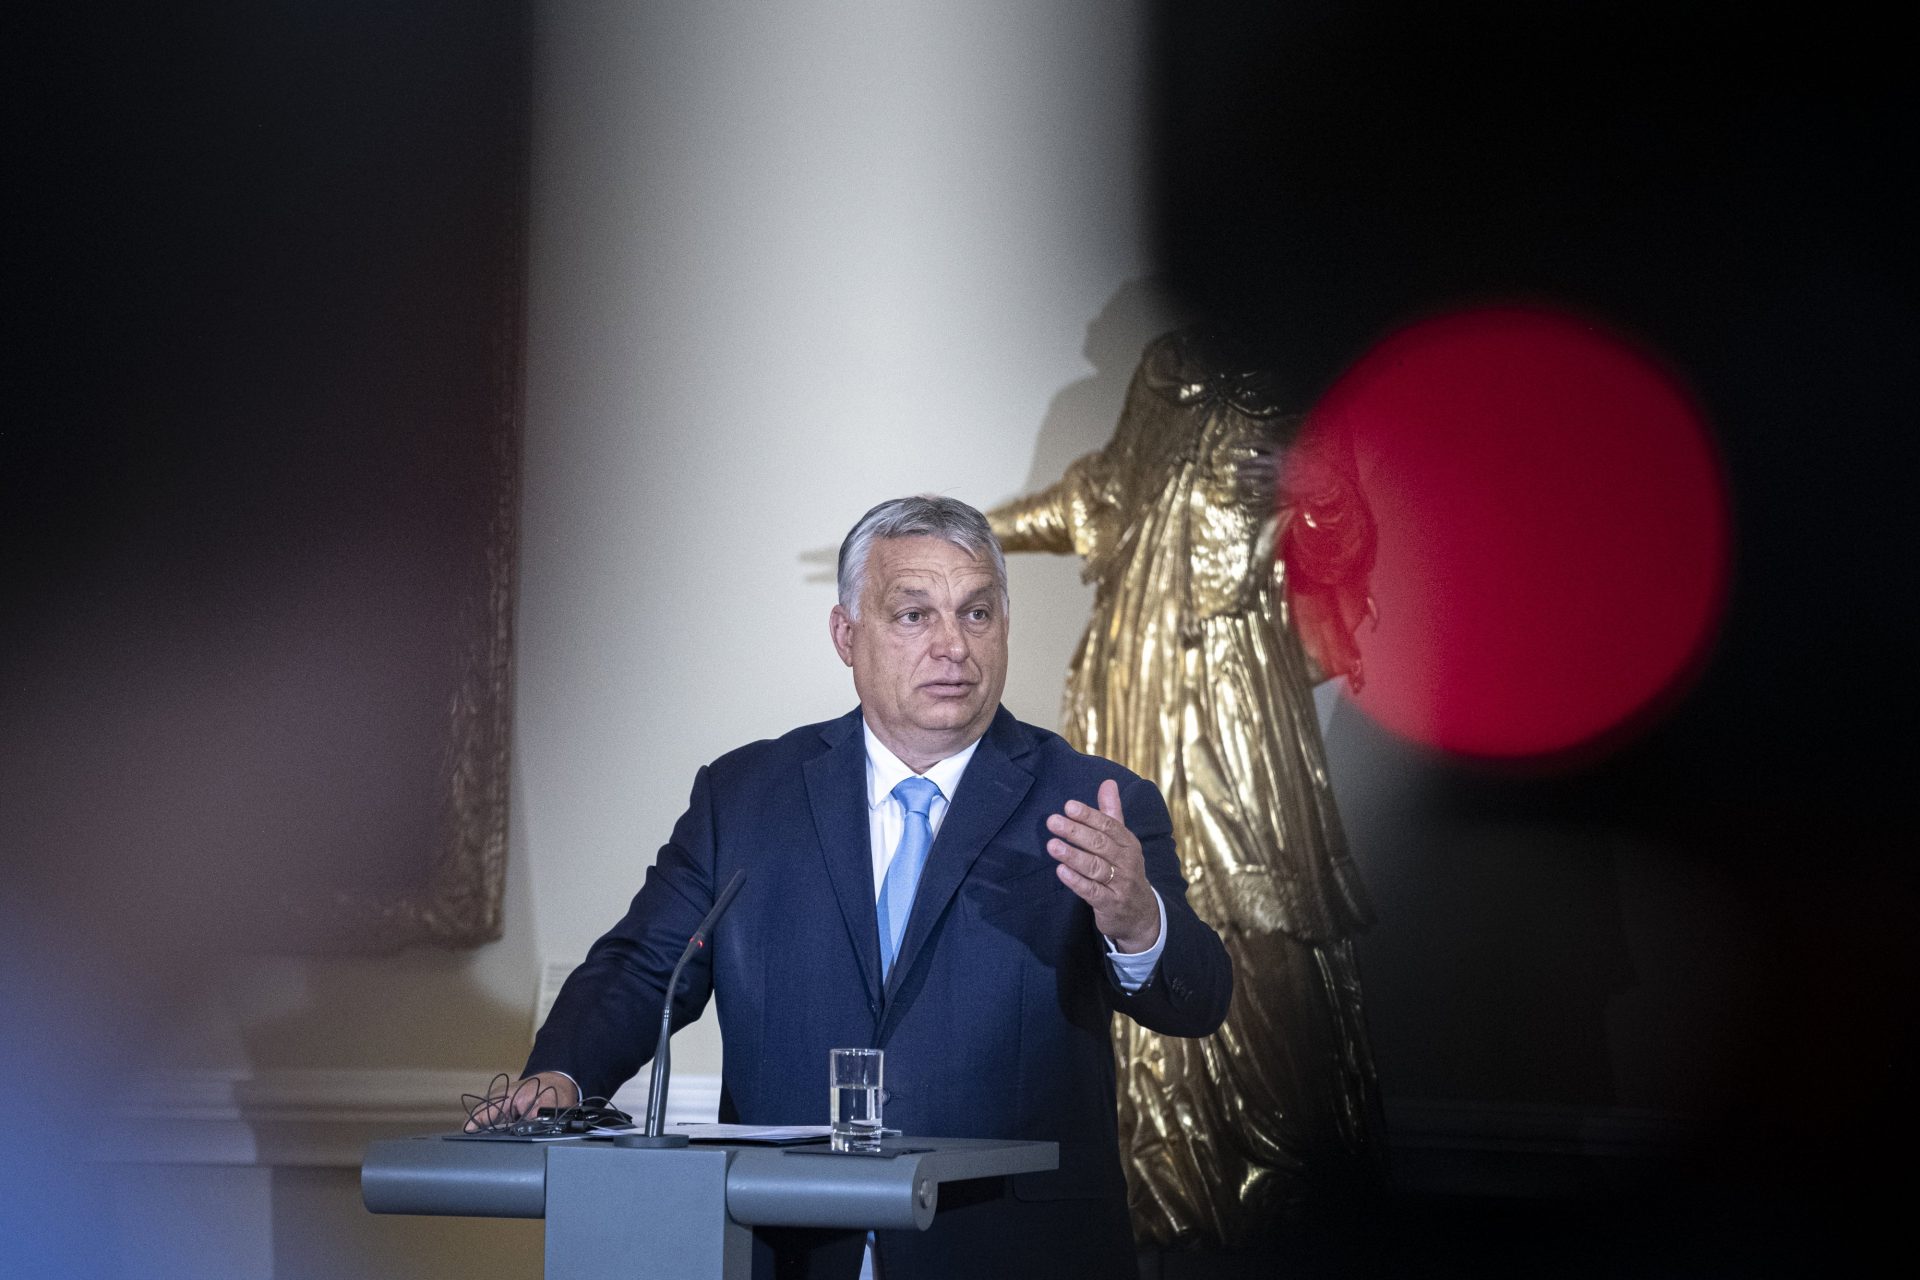 Orbán: Hungary initiates Budapest summit of Turkic Council, V4 in 2022